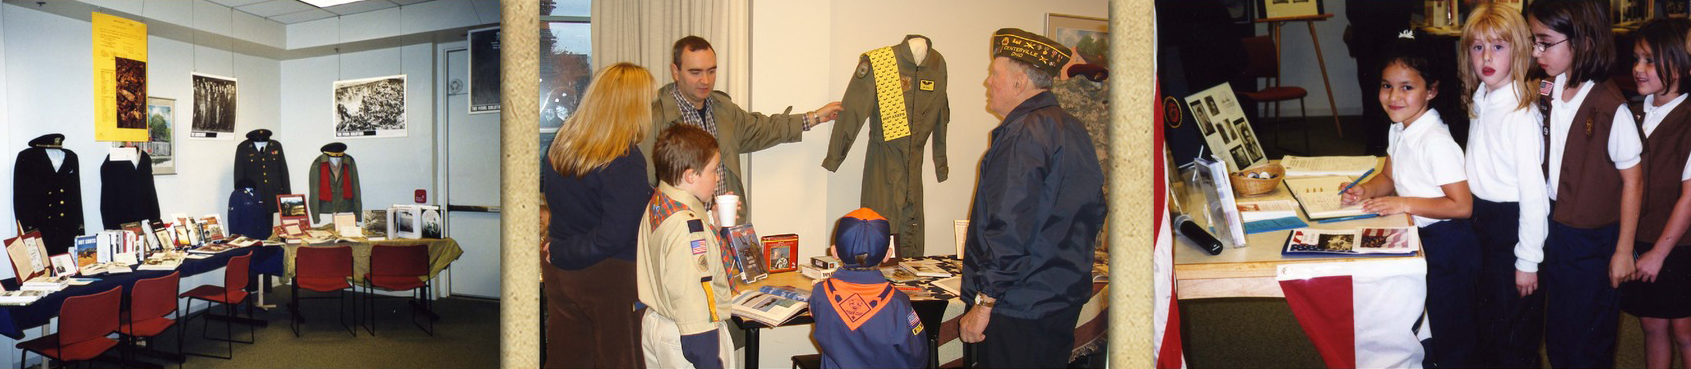 photo of military exhibit and open house